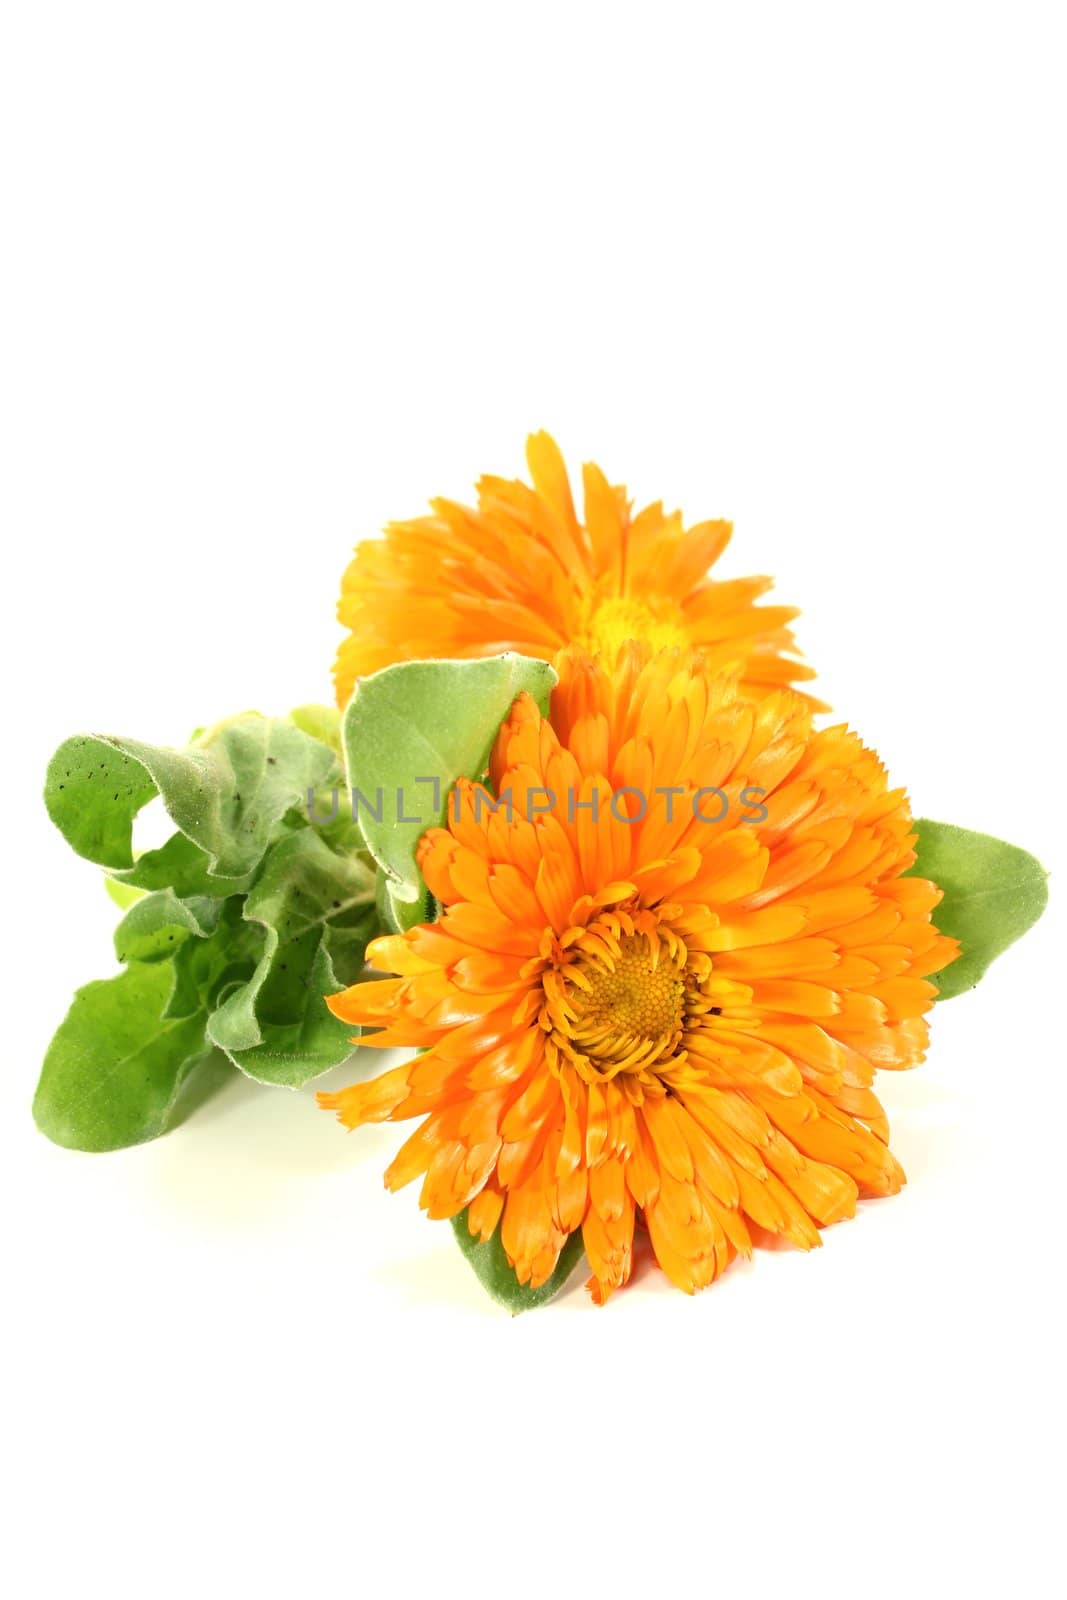 orange Marigold with leaves by discovery